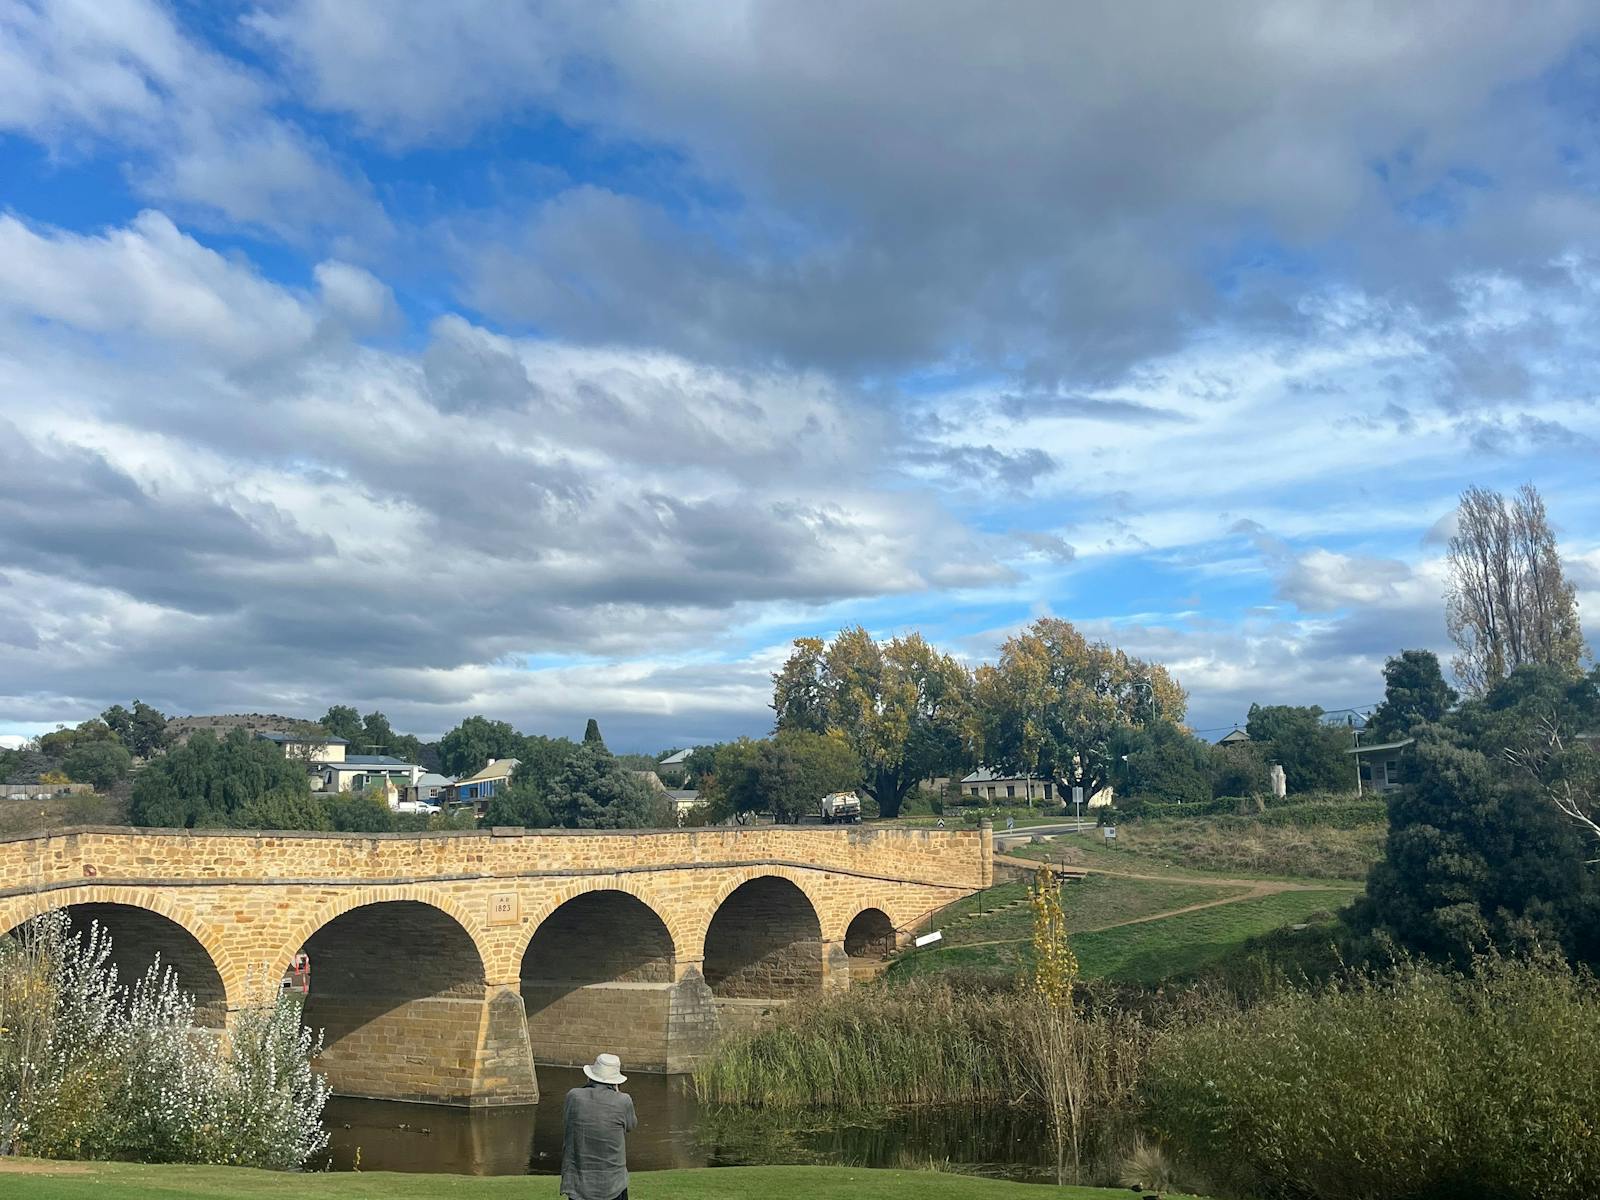 A photo of the Richmond Bridge, ducks on the grass by the river